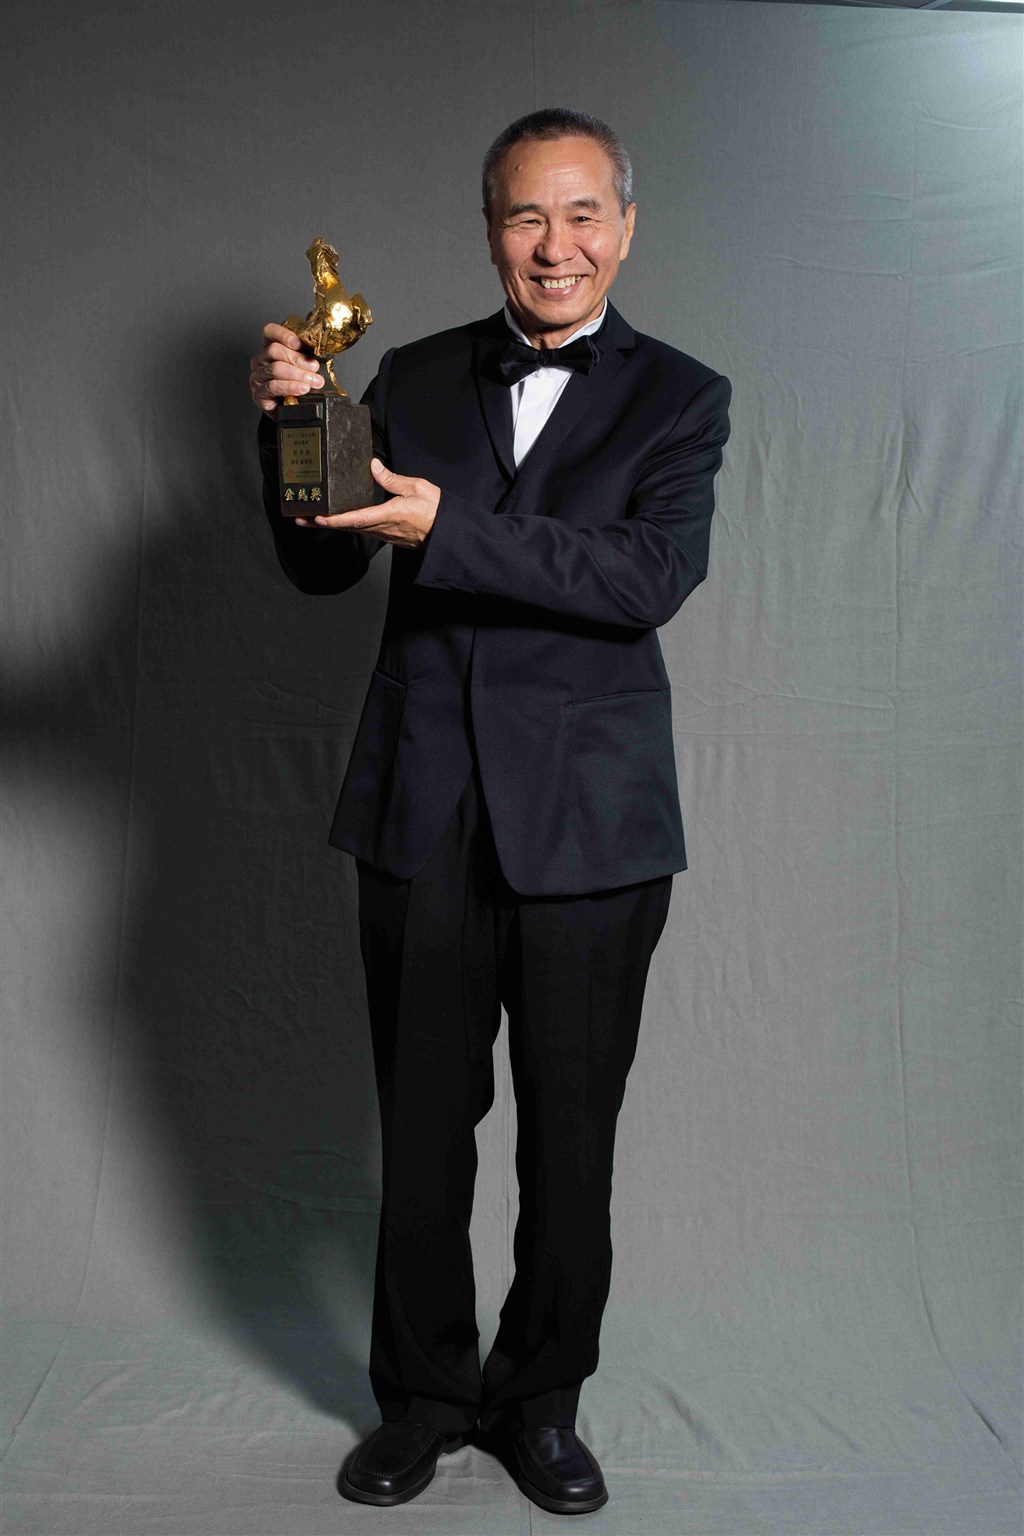 Golden Horse Film Festival Executive Committee unanimously grants Lifetime Achievement Award to Hou Hsiao-hsien